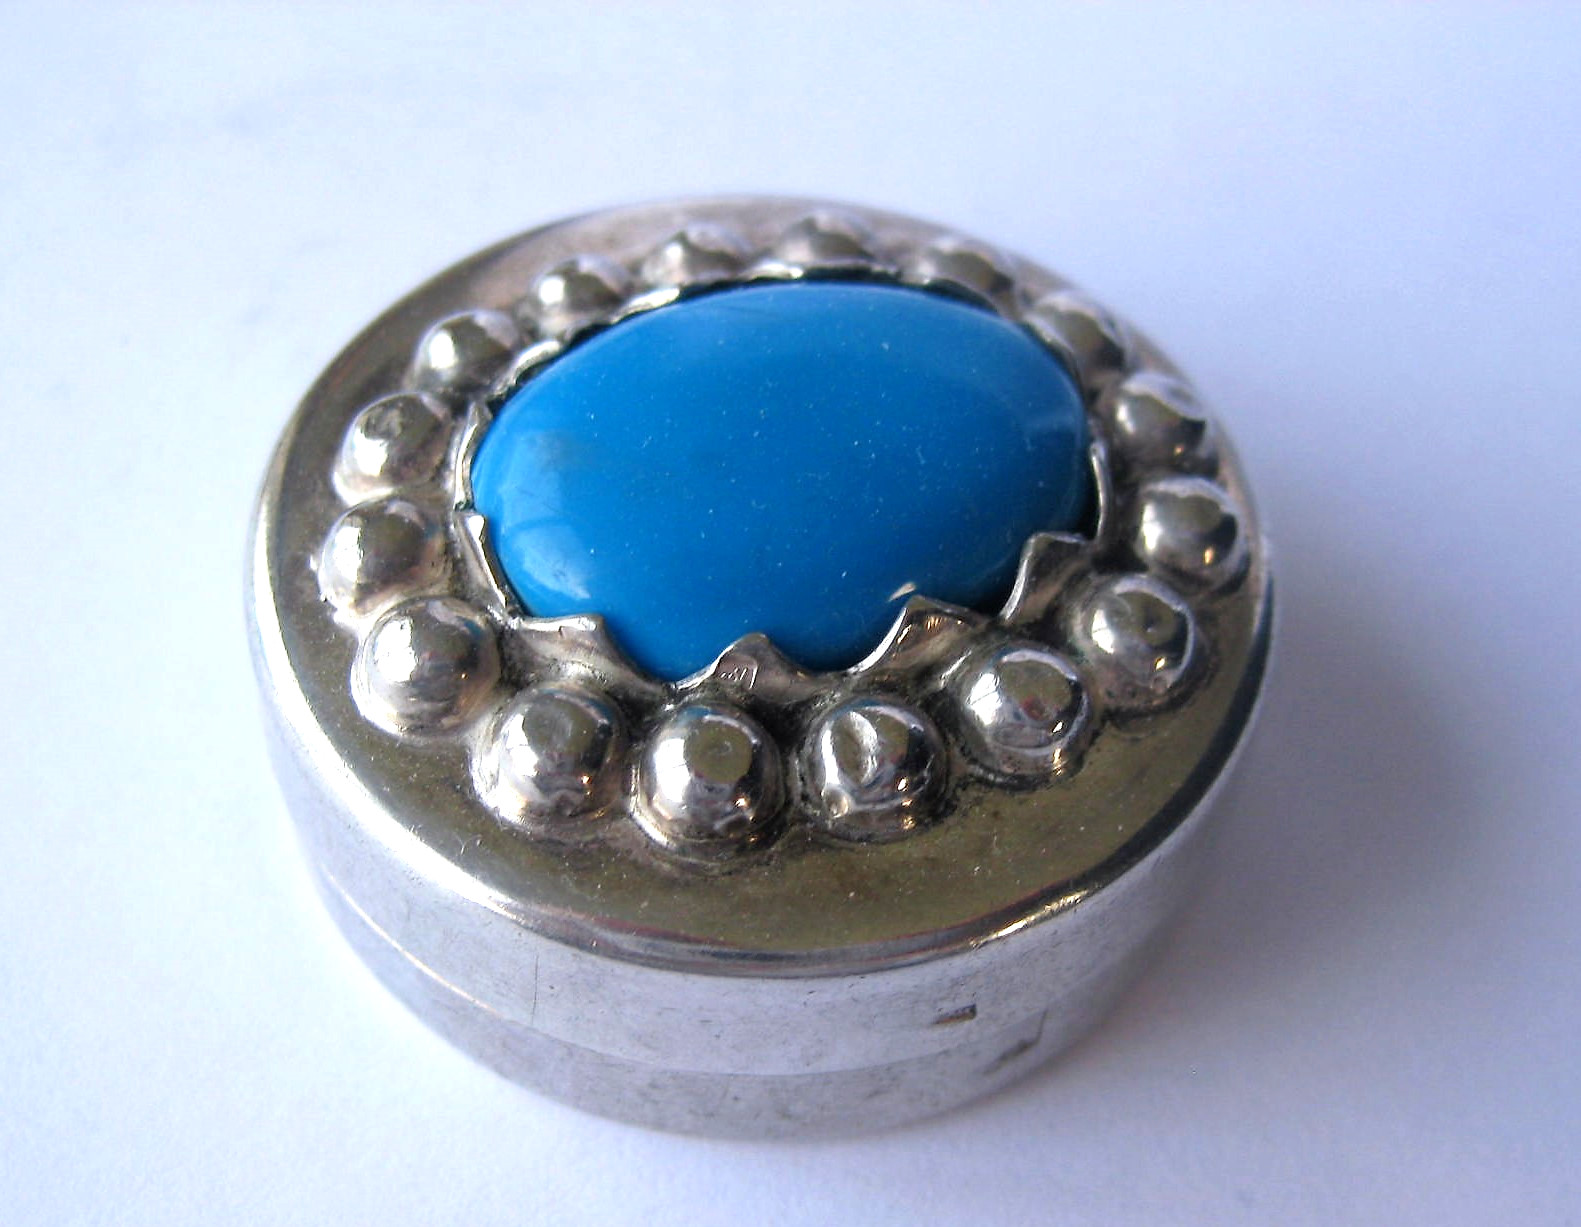 Silver circular vintage pillbox with turquoise stone